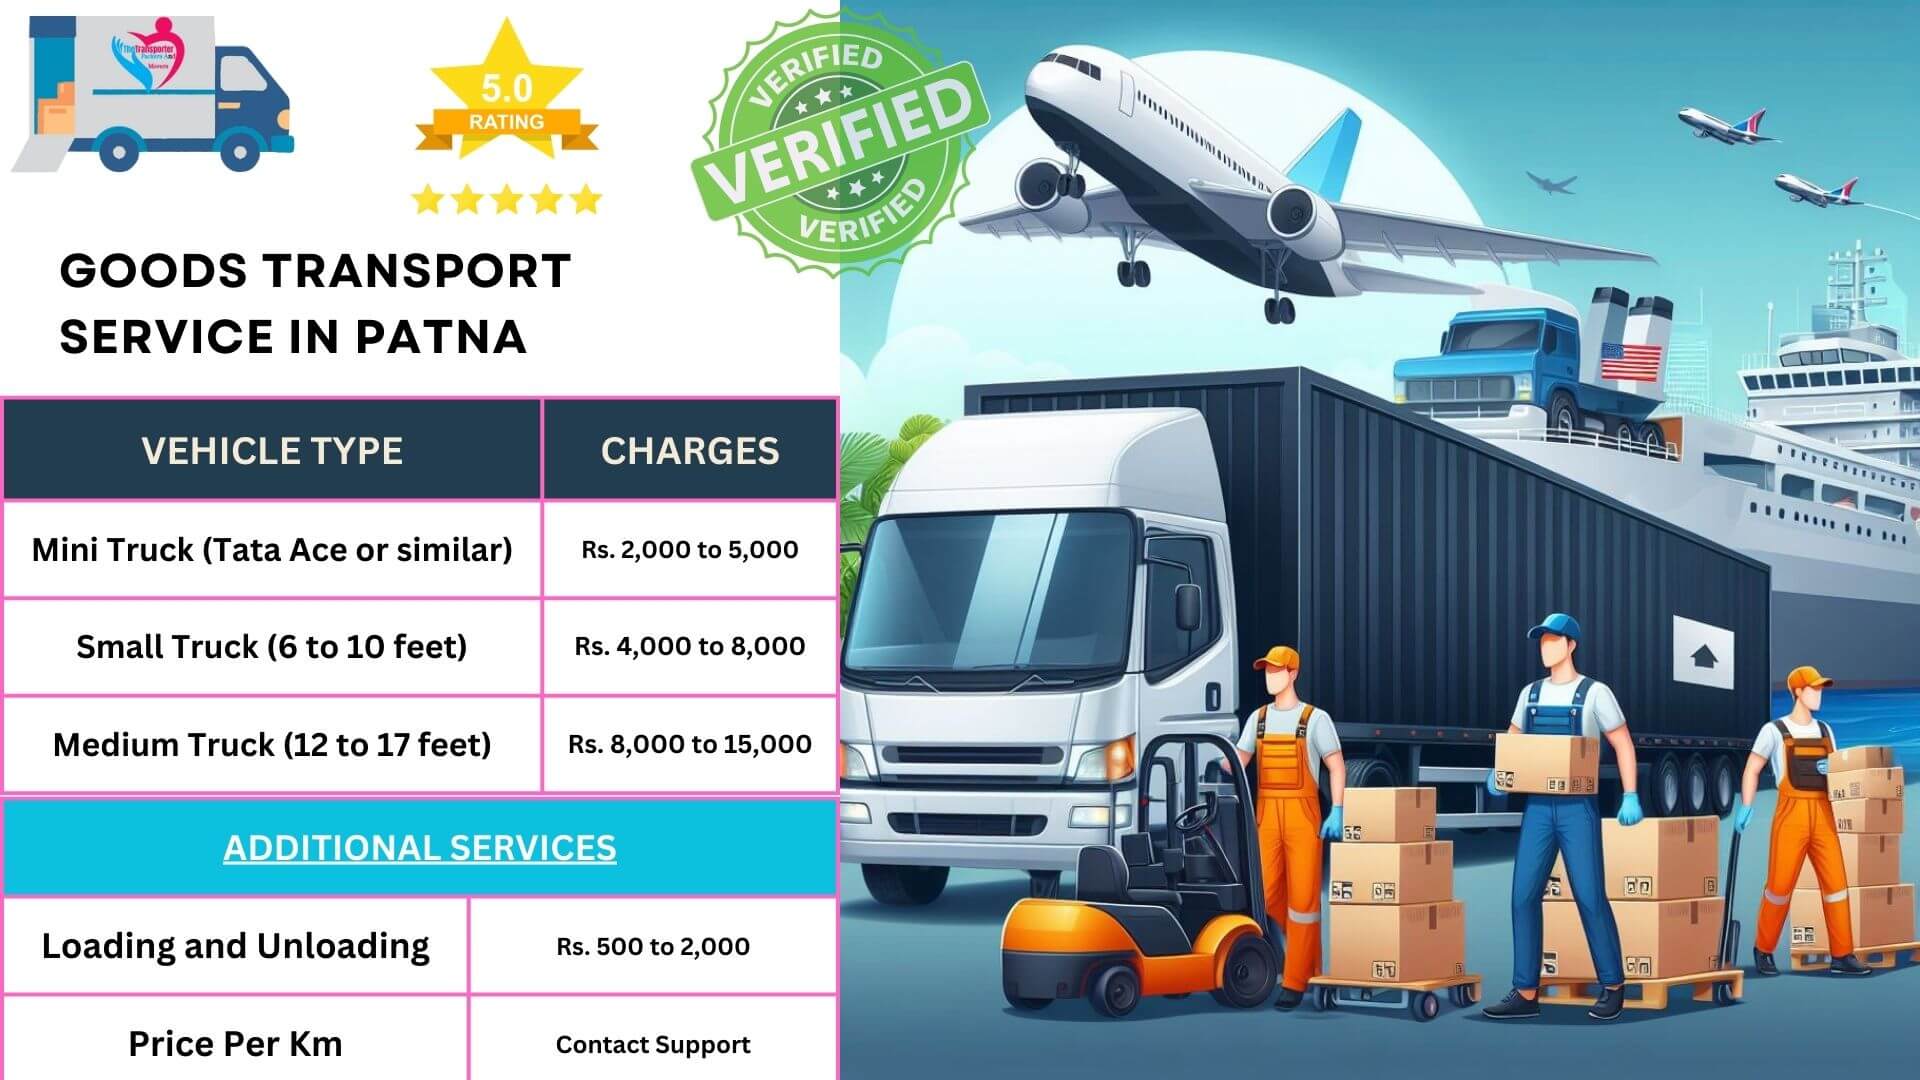 Goods transport services in Patna